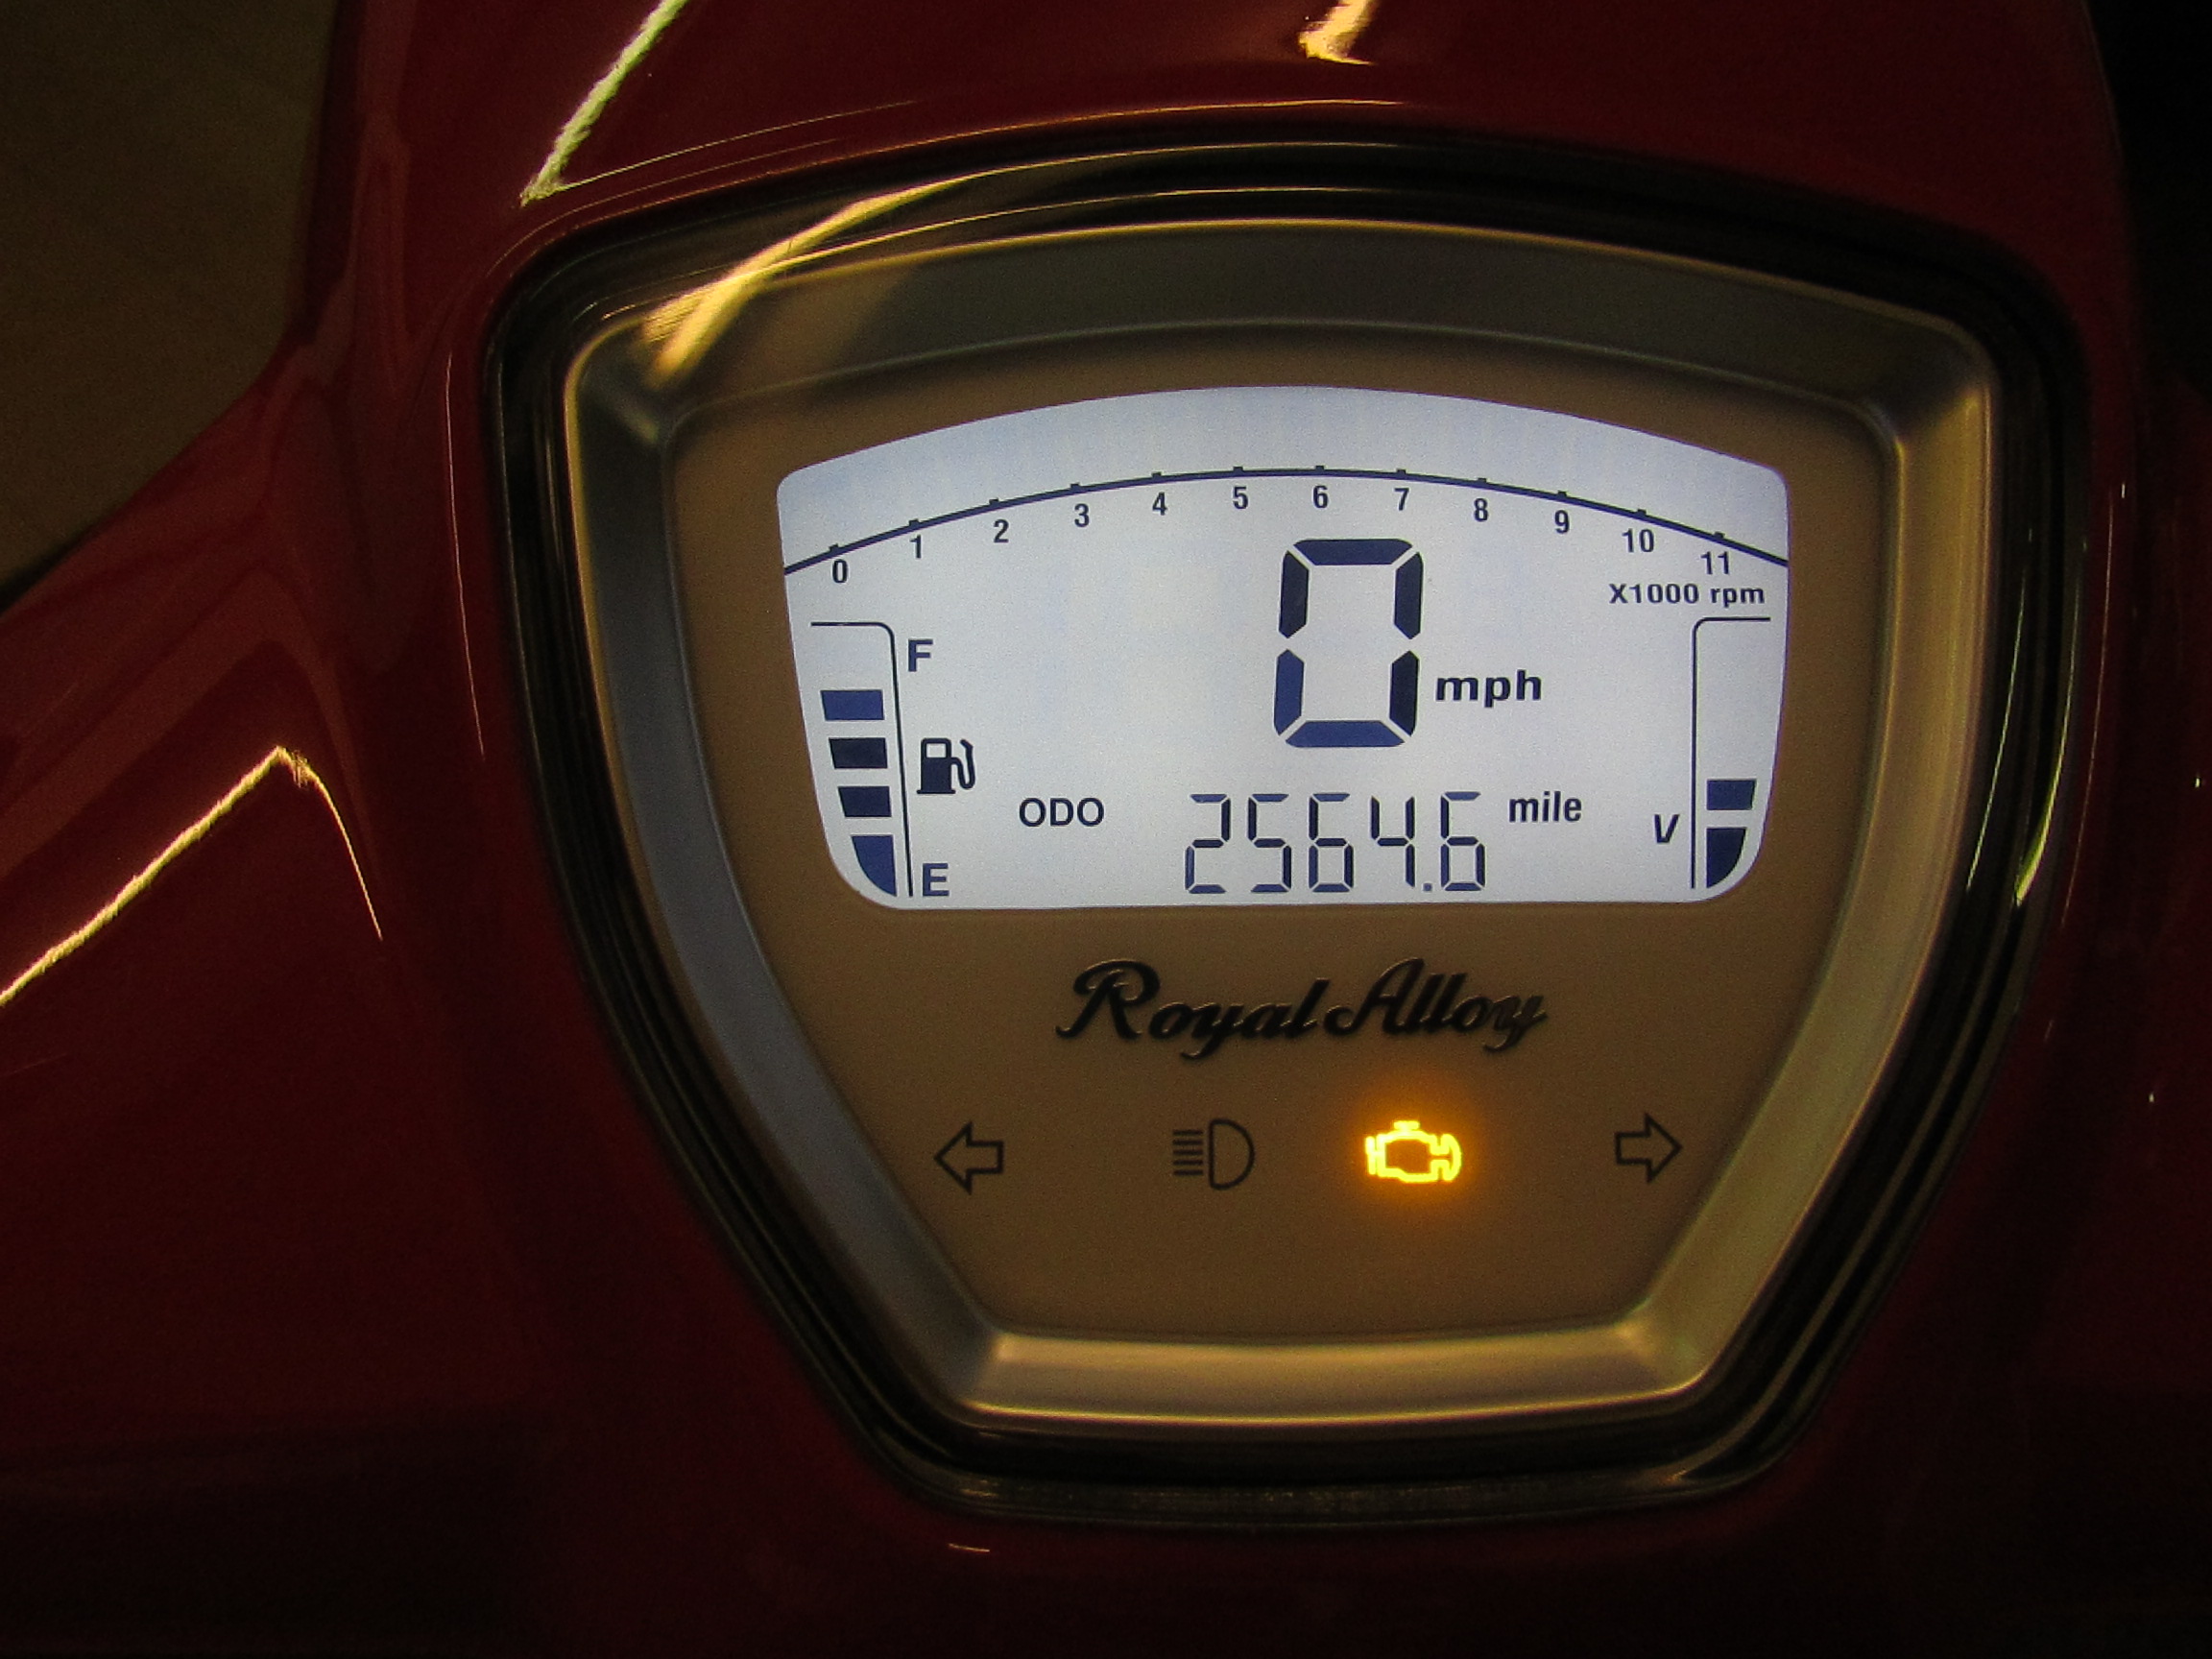 ROYAL ALLOY GT125 AC Red SOLD